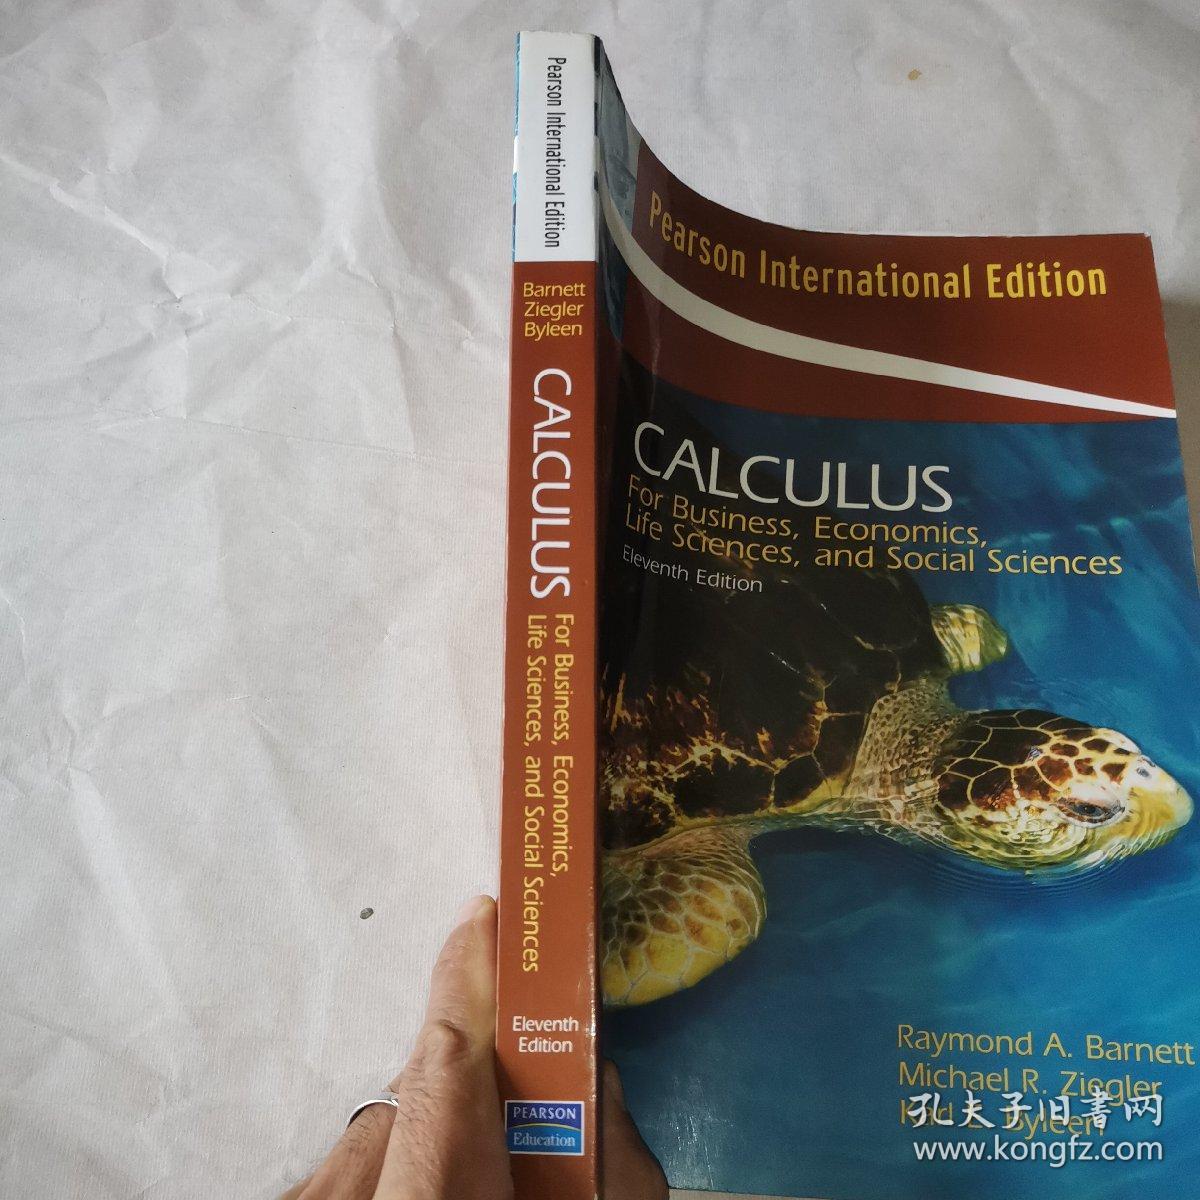 PEARSON INTERNATIONAL EDITION CALCULUS FOR BUSINESS，ECONOMICS，LIFE SCIENCES，AND SOCIAL SCIENCES ELEVENTH EDITION英文原版英文书